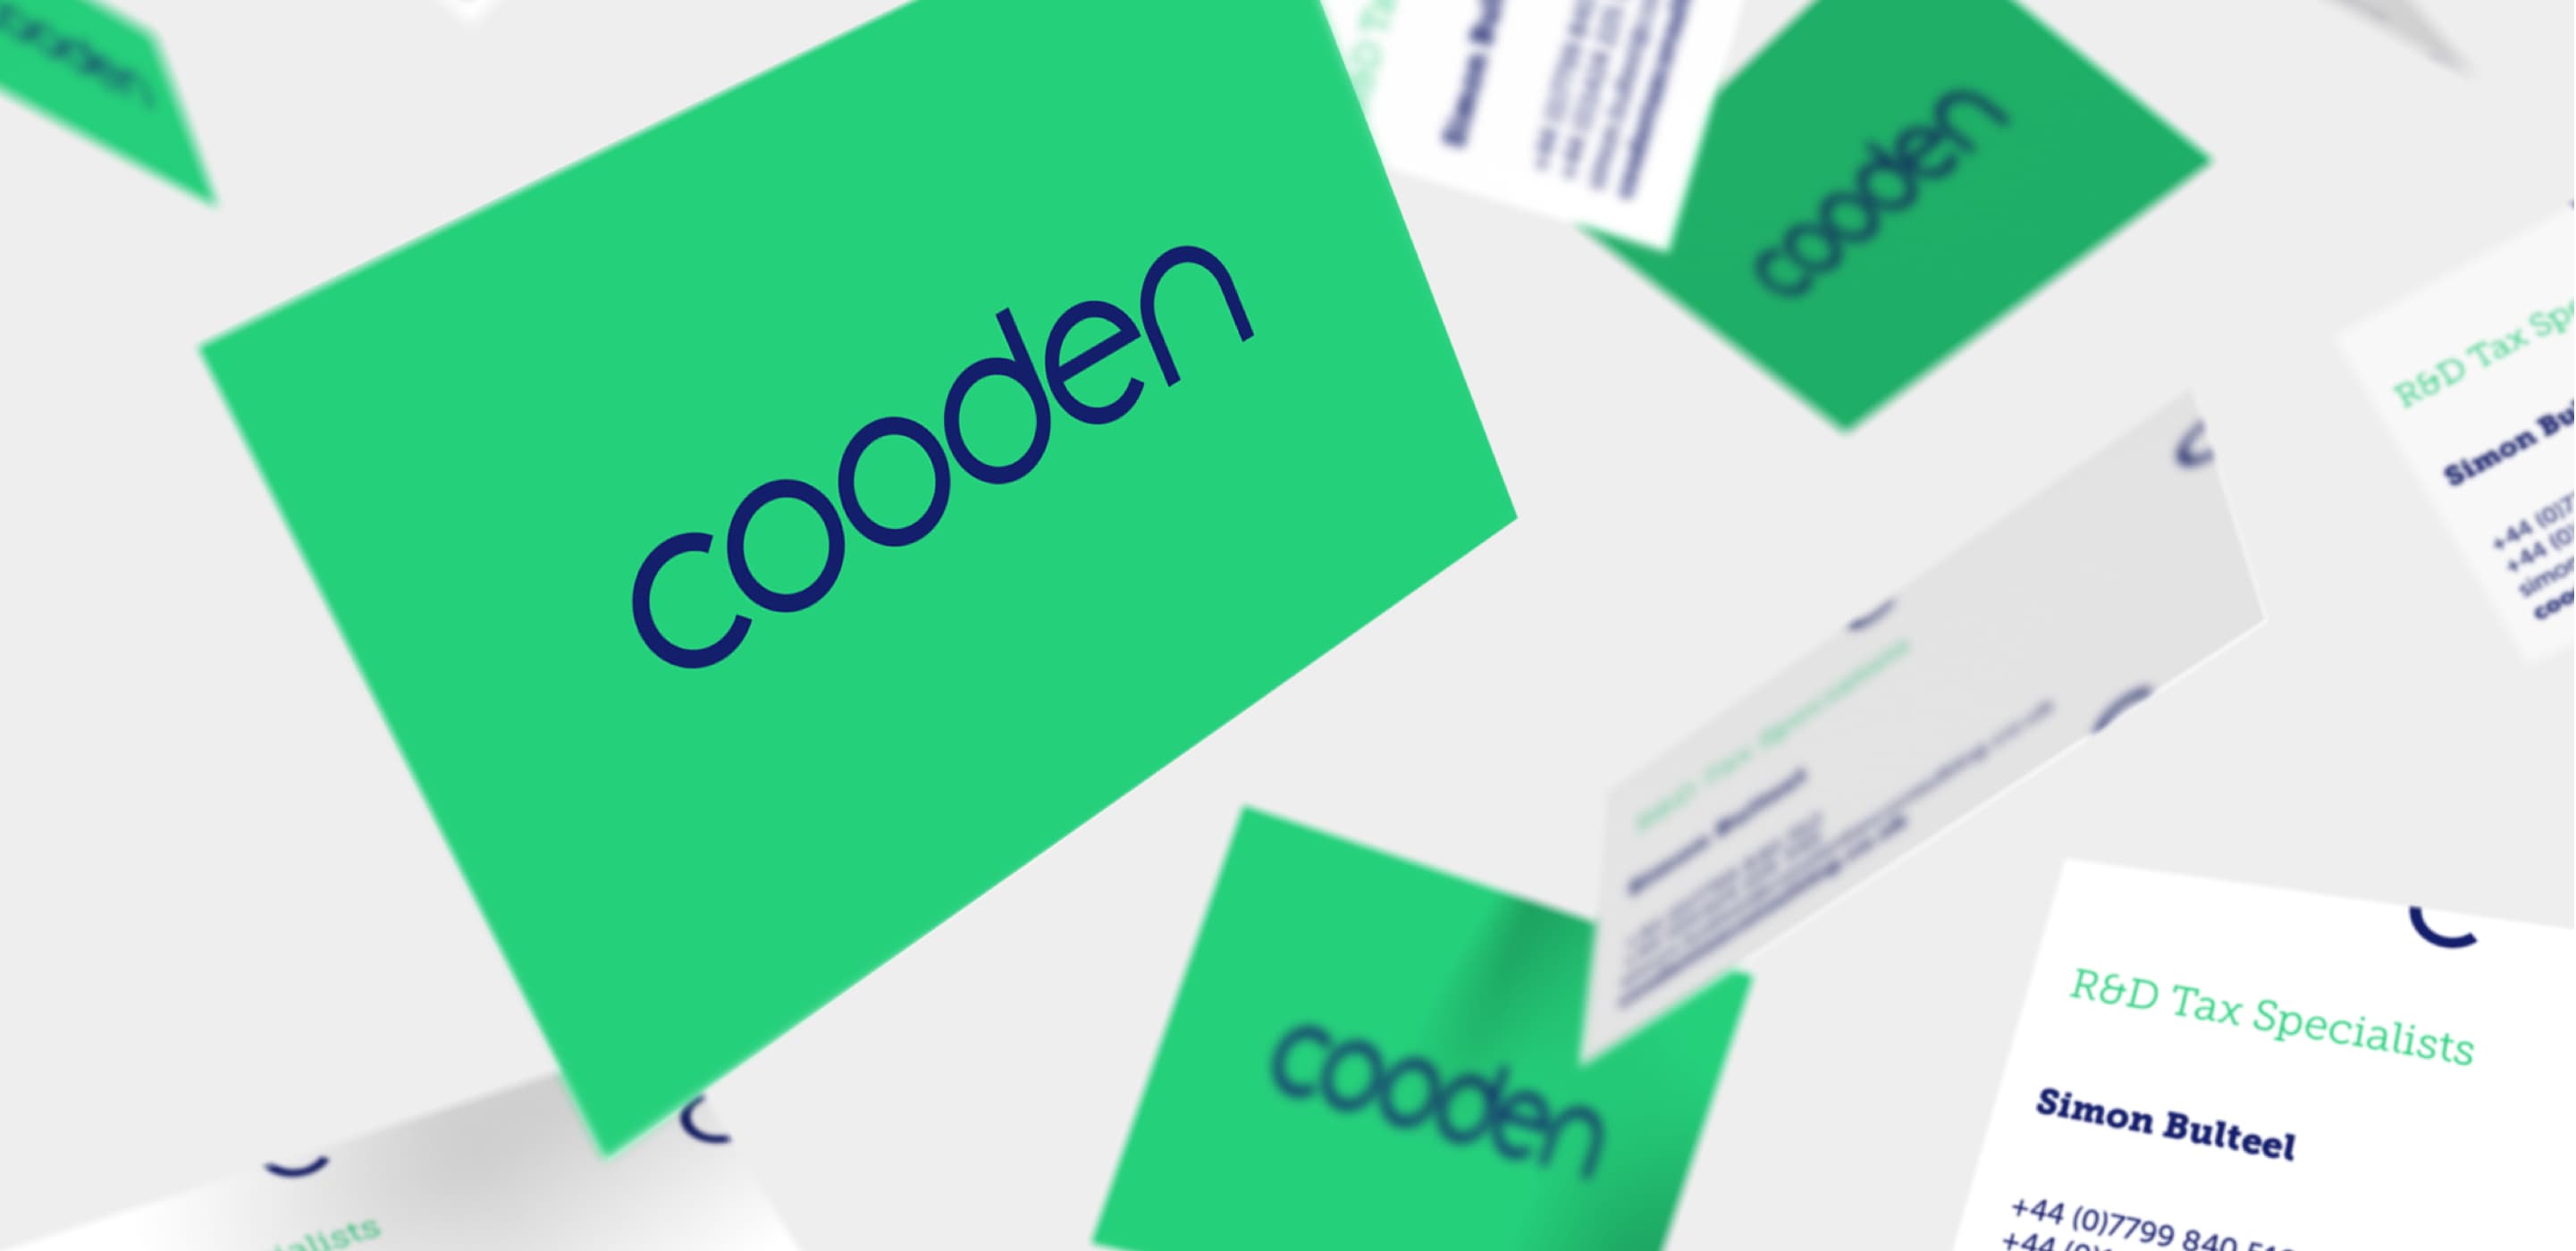 Cooden Tax Consulting business cards